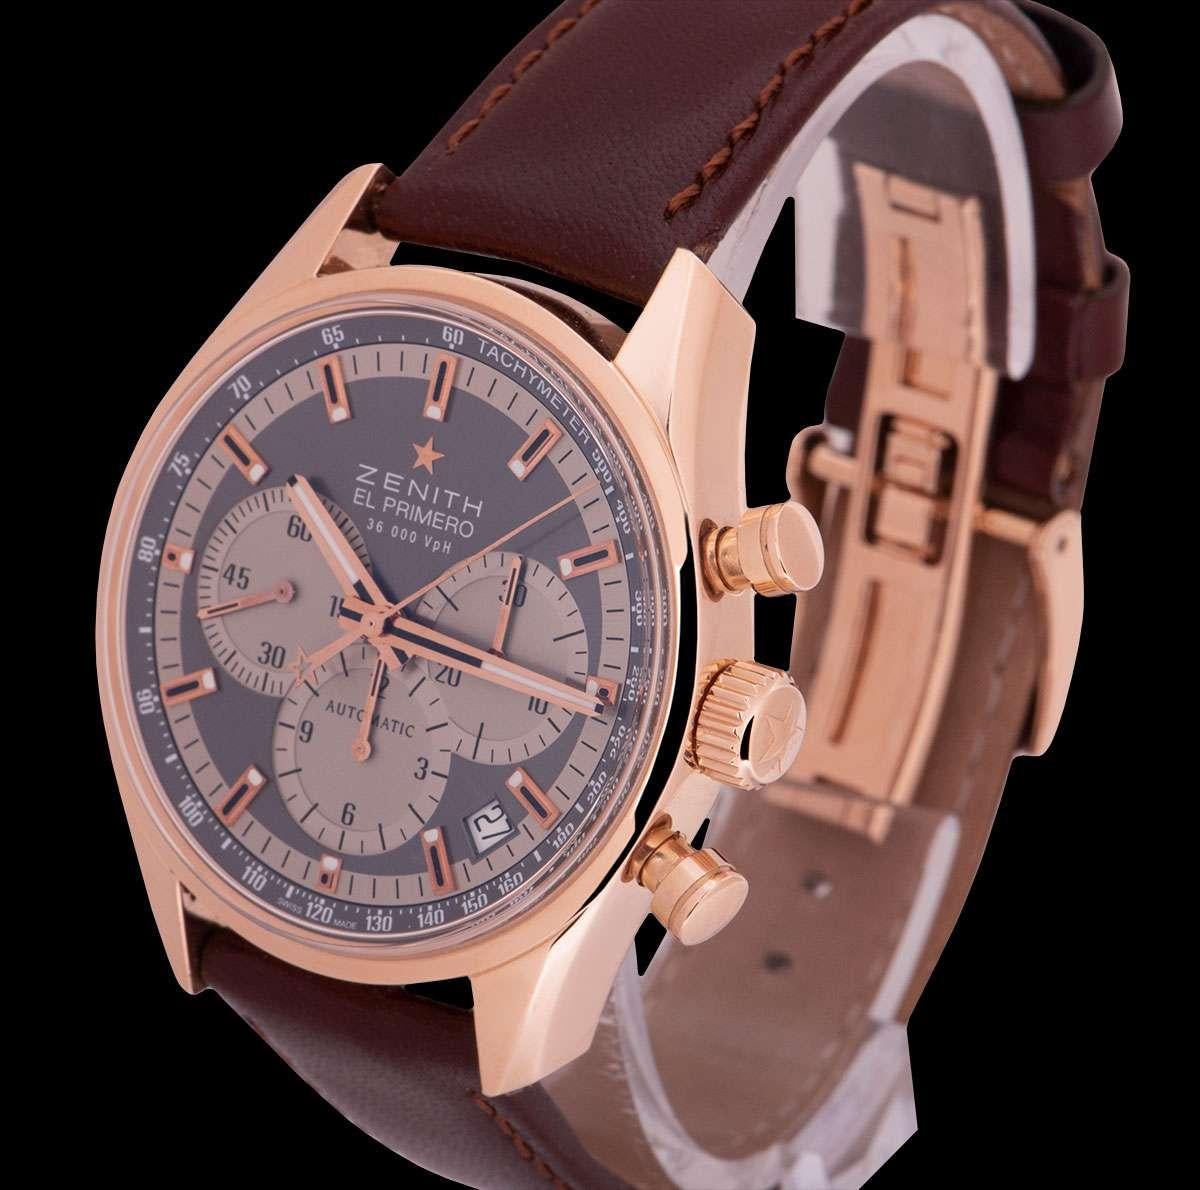 An 18k Rose Gold El Primero Gents Wristwatch, grey dial with applied hour markers, 30 minute recorder at 3 0'clock, date between 4 and 5 0'clock, 12 hour recorder at 6 0'clock, small seconds at 9 0'clock, tachymeter scale around the edge of the